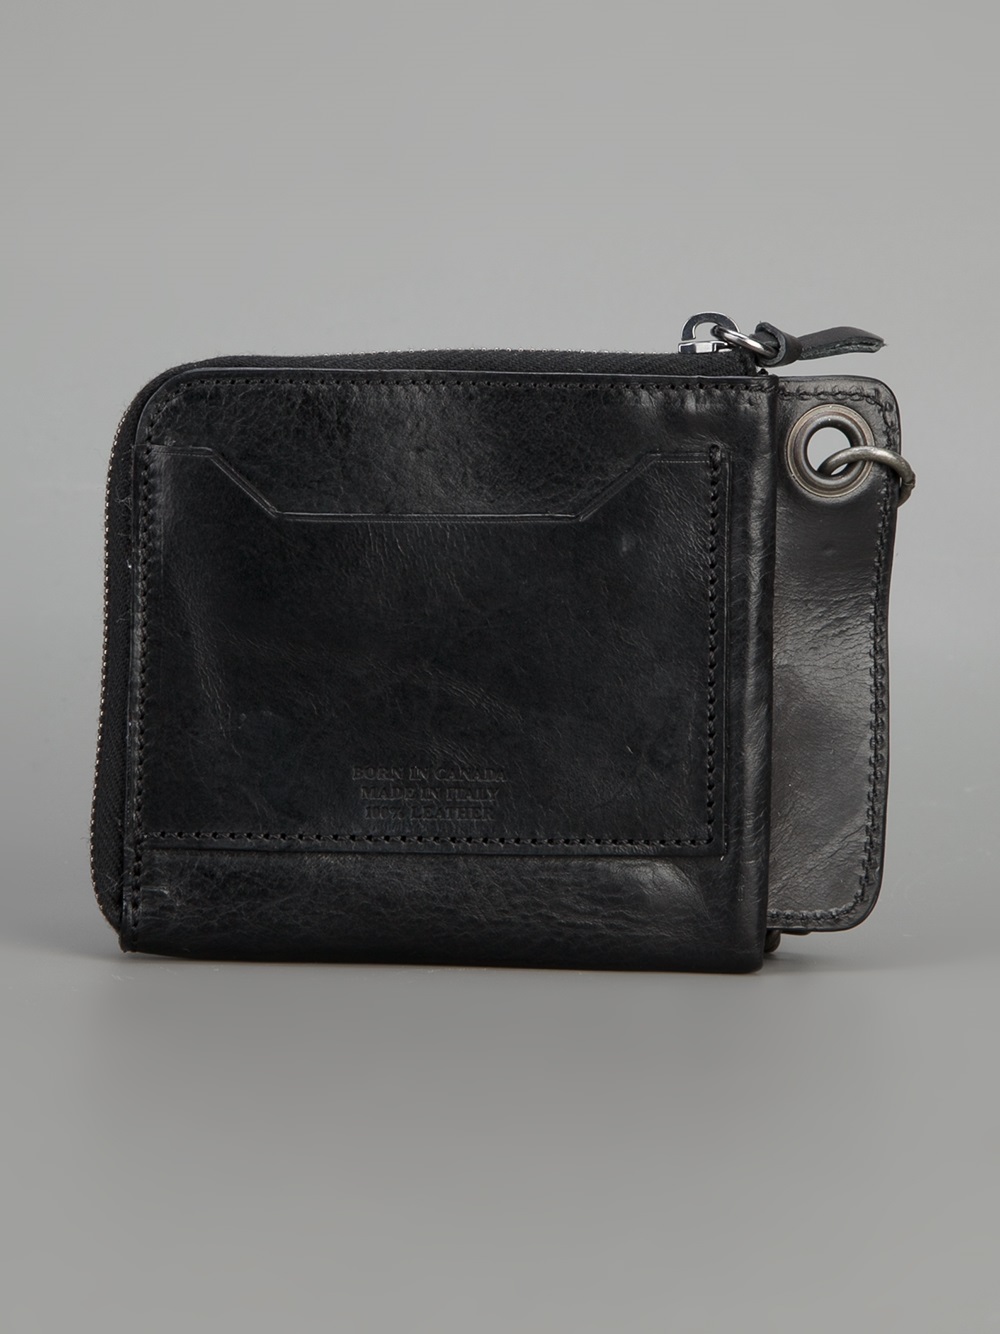 Lyst - Dsquared² Chain Wallet in Black for Men